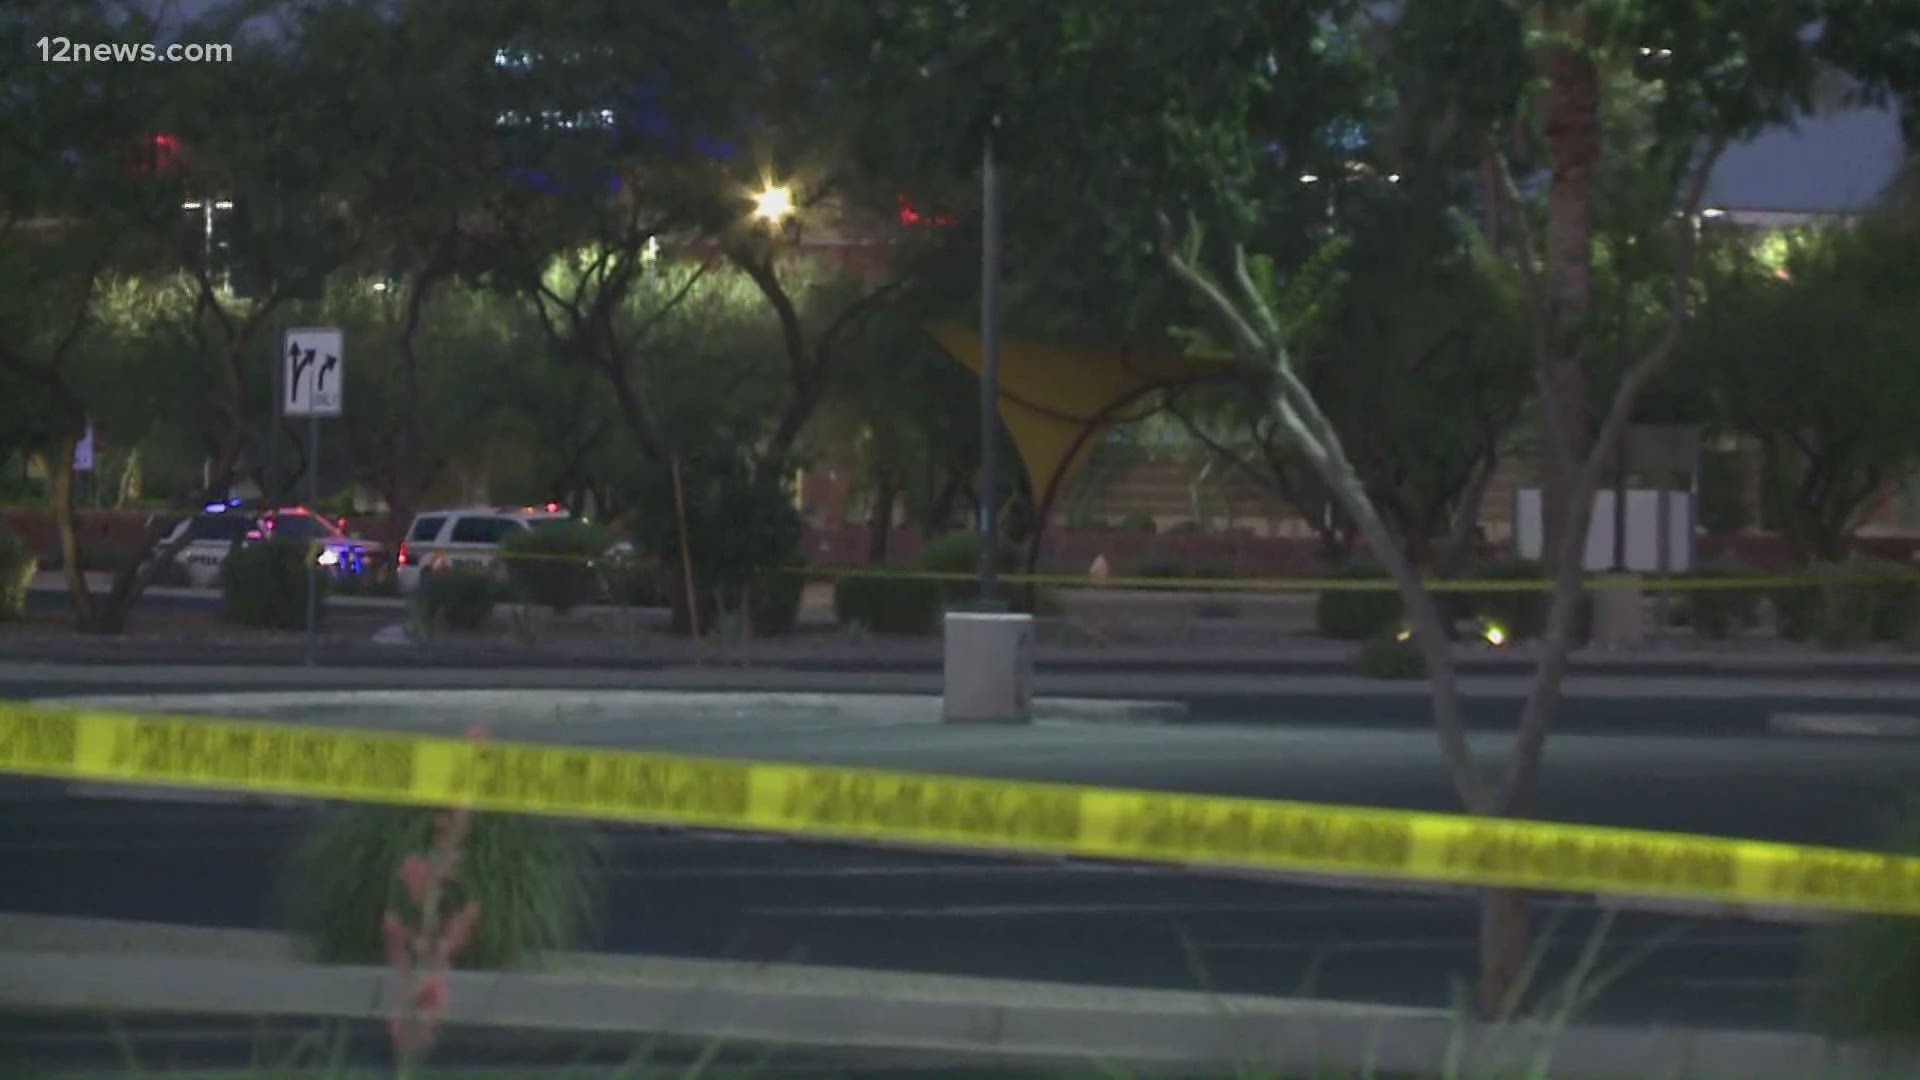 Three people were injured and a suspect is in custody after a shooting at Westgate in Glendale. We have team coverage to bring you the latest on Thursday, May 21.